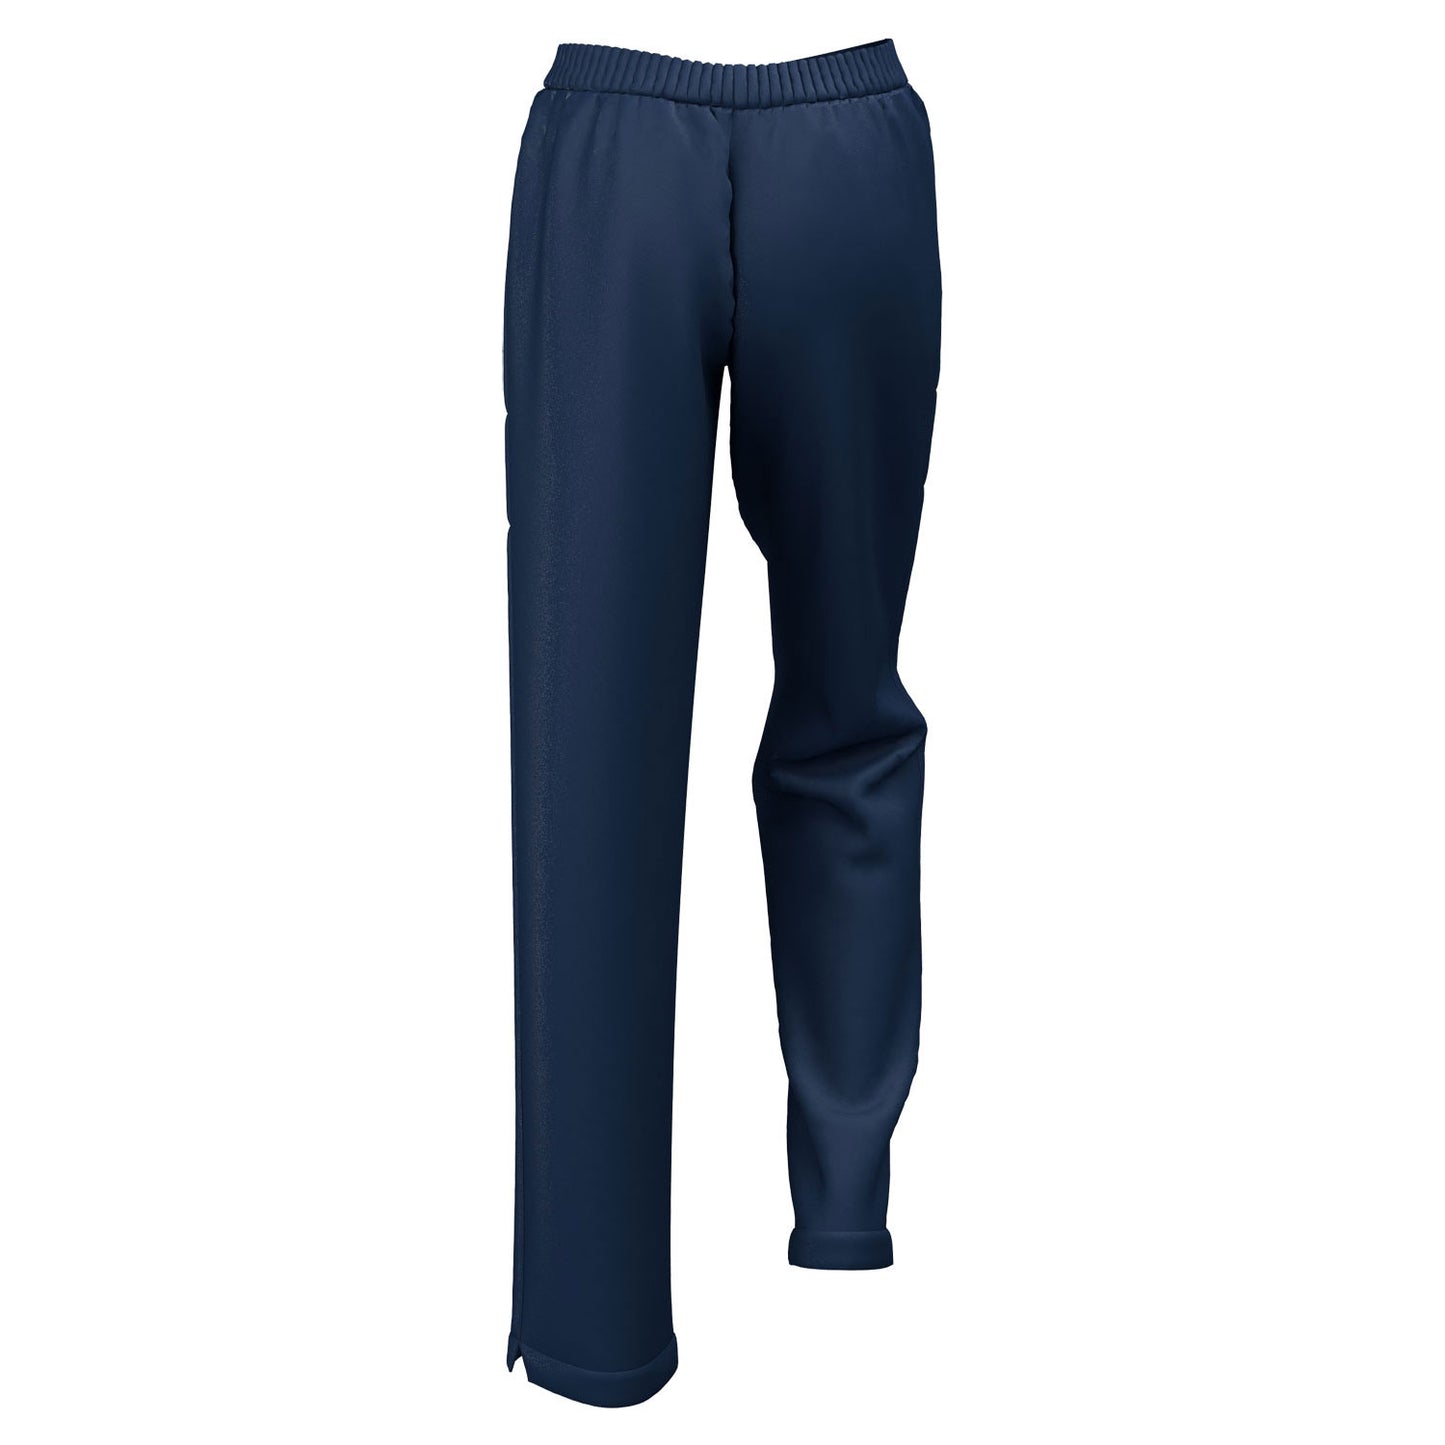 Christ's College Cambridge Tracksuit Trousers Womens